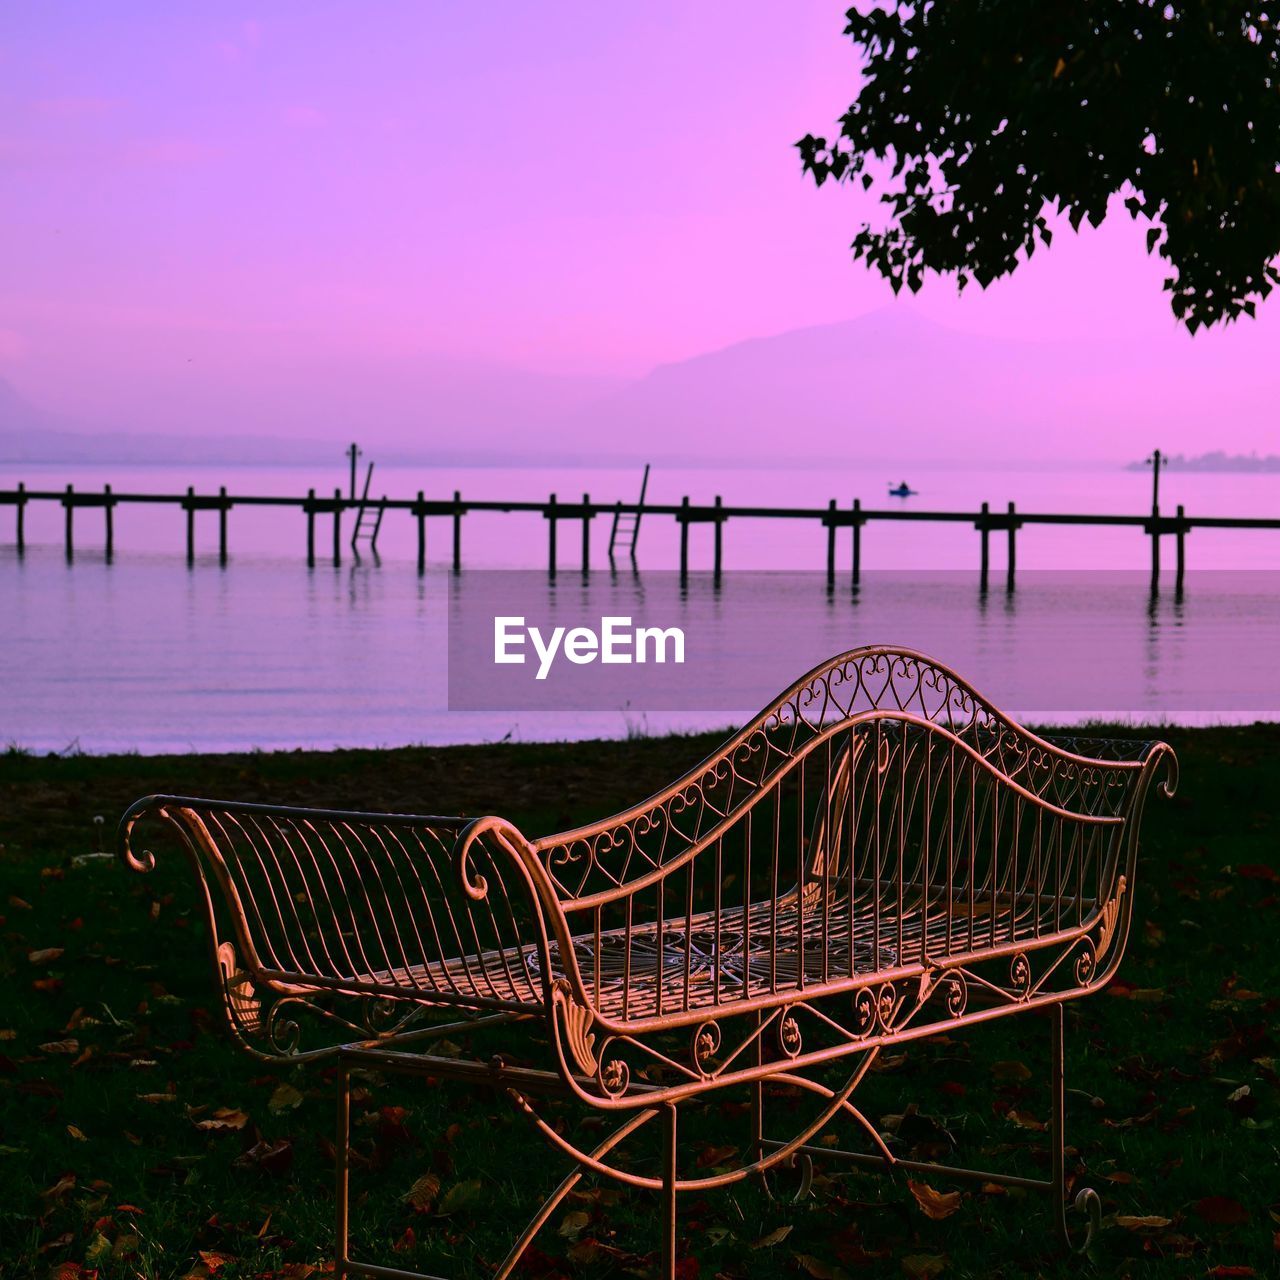 EMPTY CHAIR BY LAKE AGAINST SKY AT SUNSET